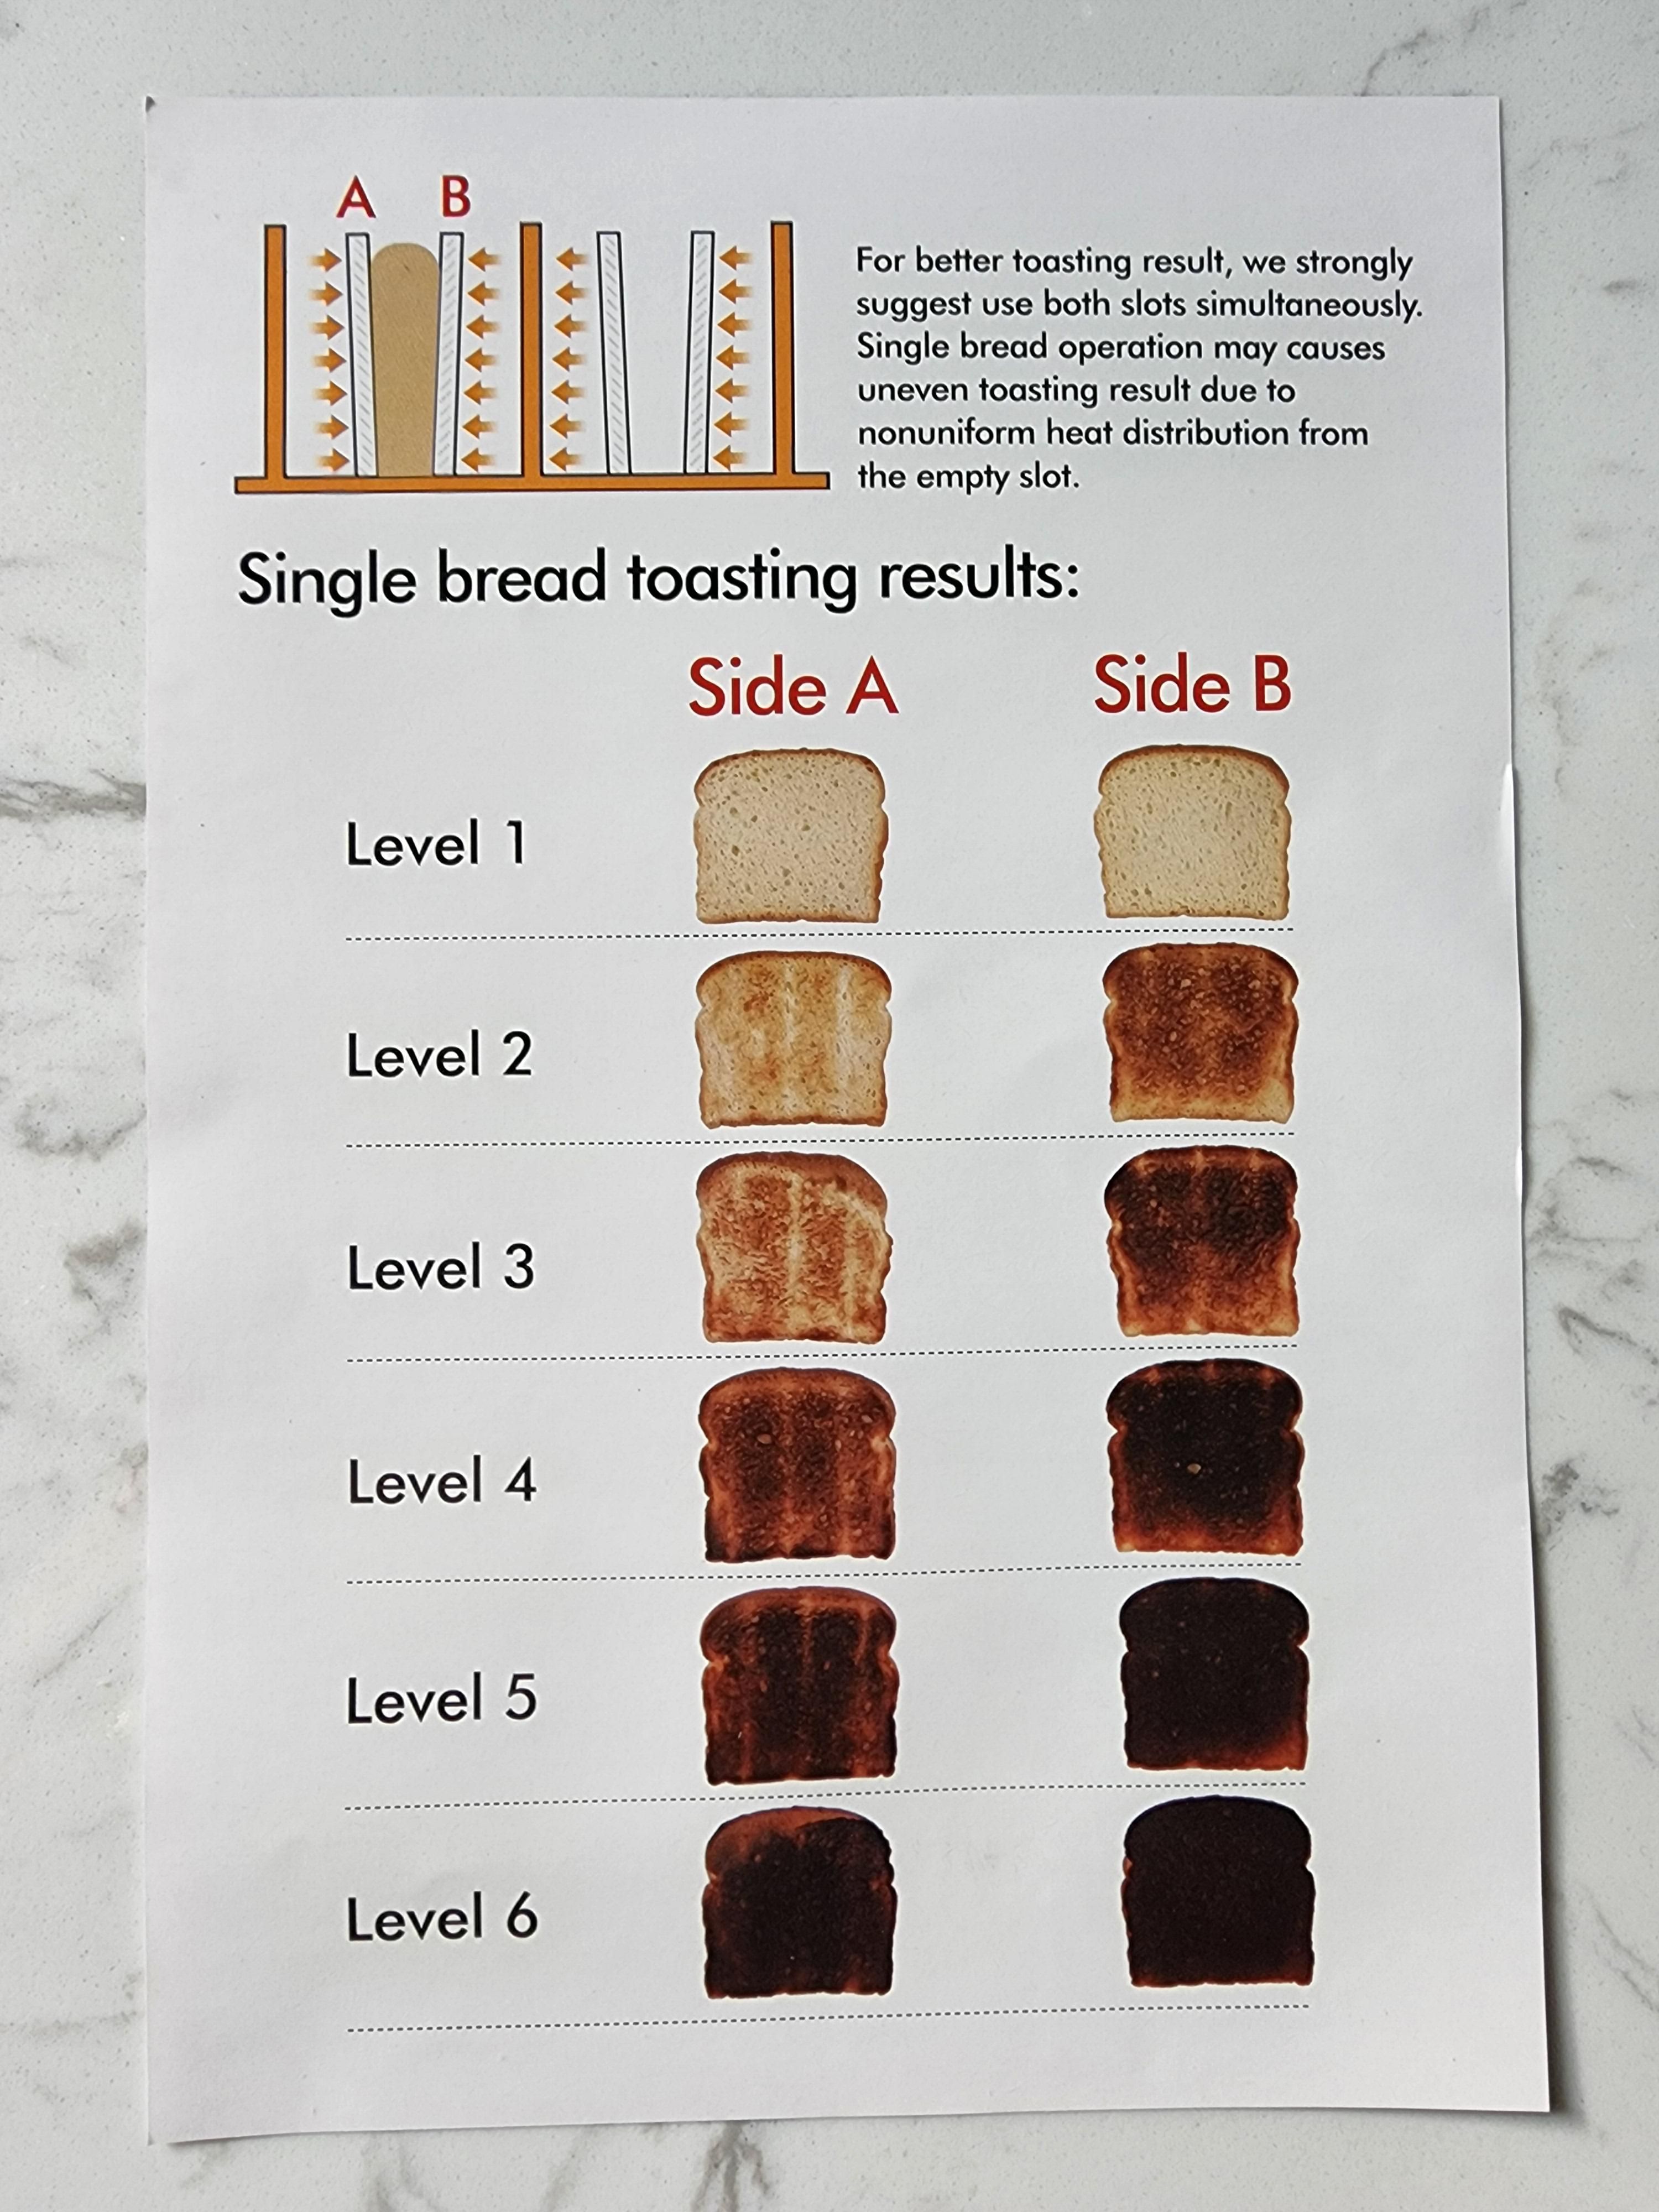 Who the *** is eating level 6 toast???